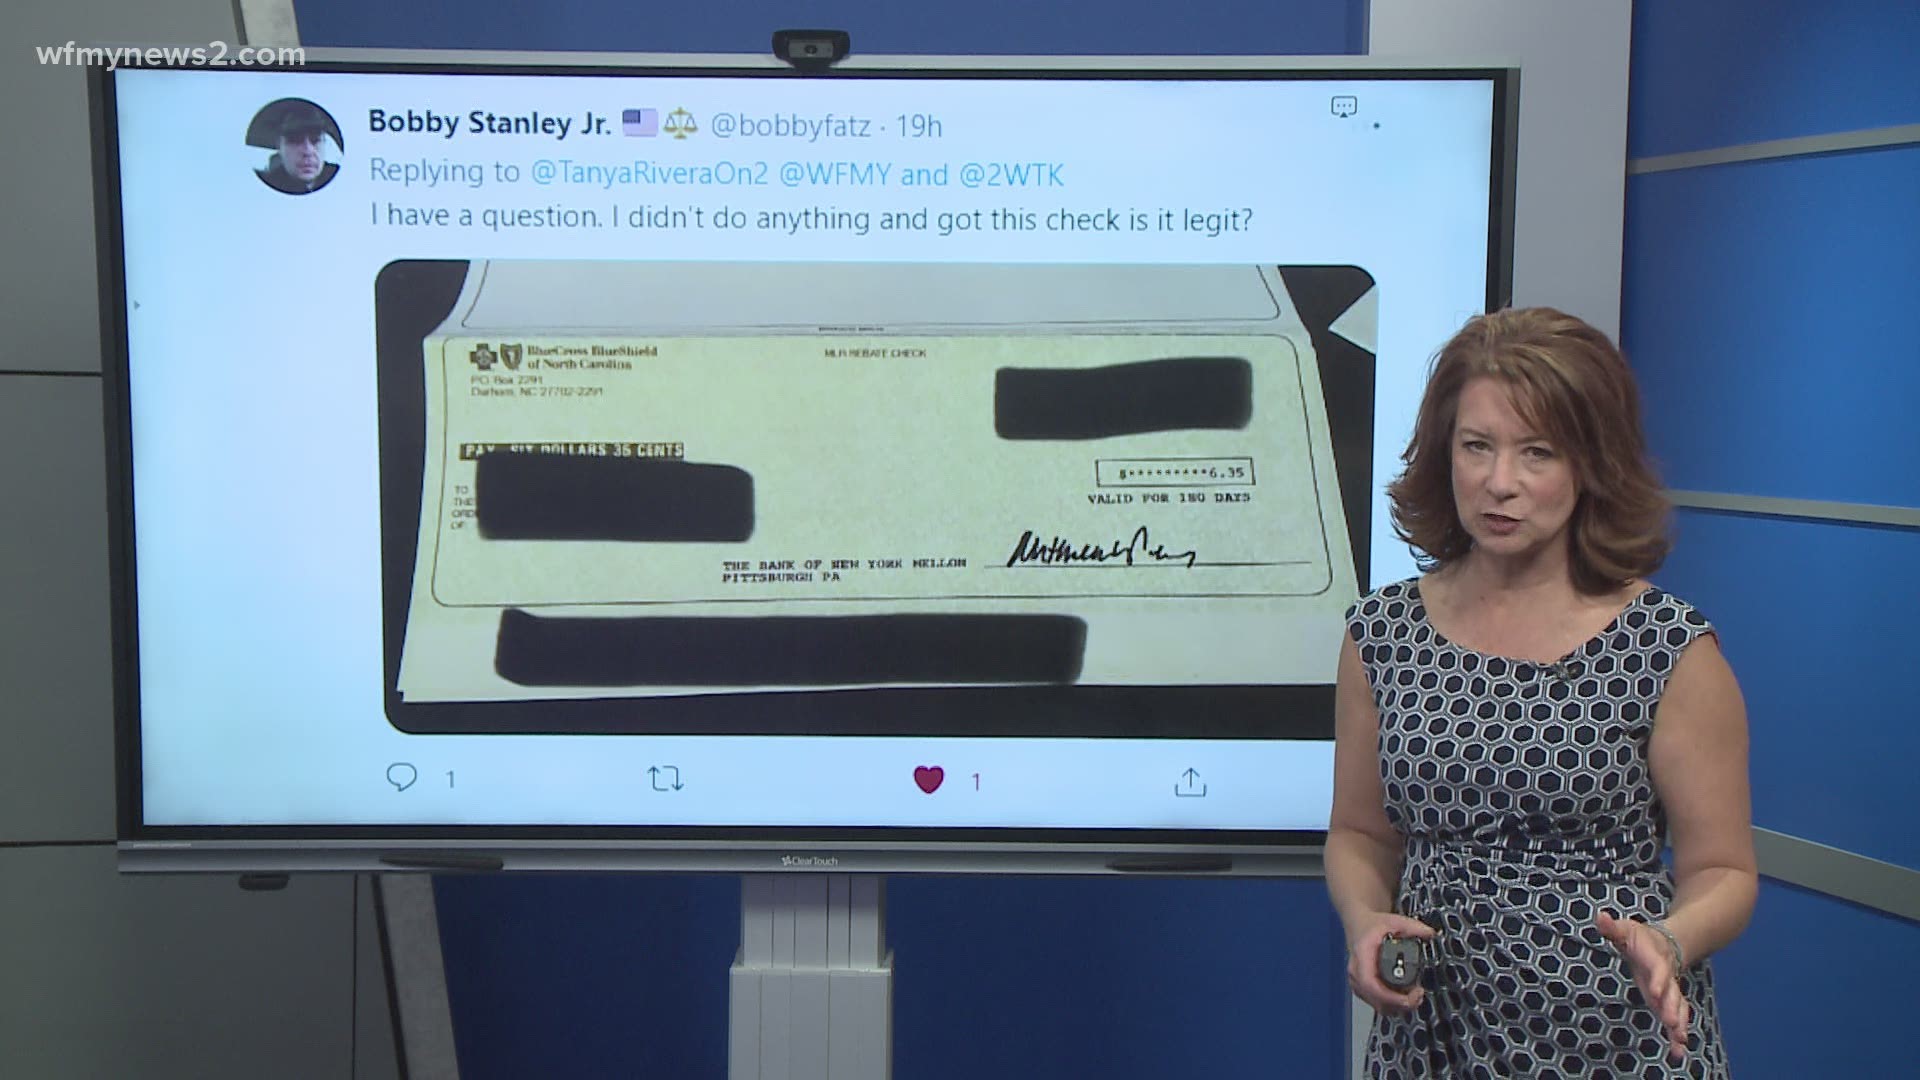 bcbs-is-sending-out-rebate-checks-find-out-why-wfmynews2